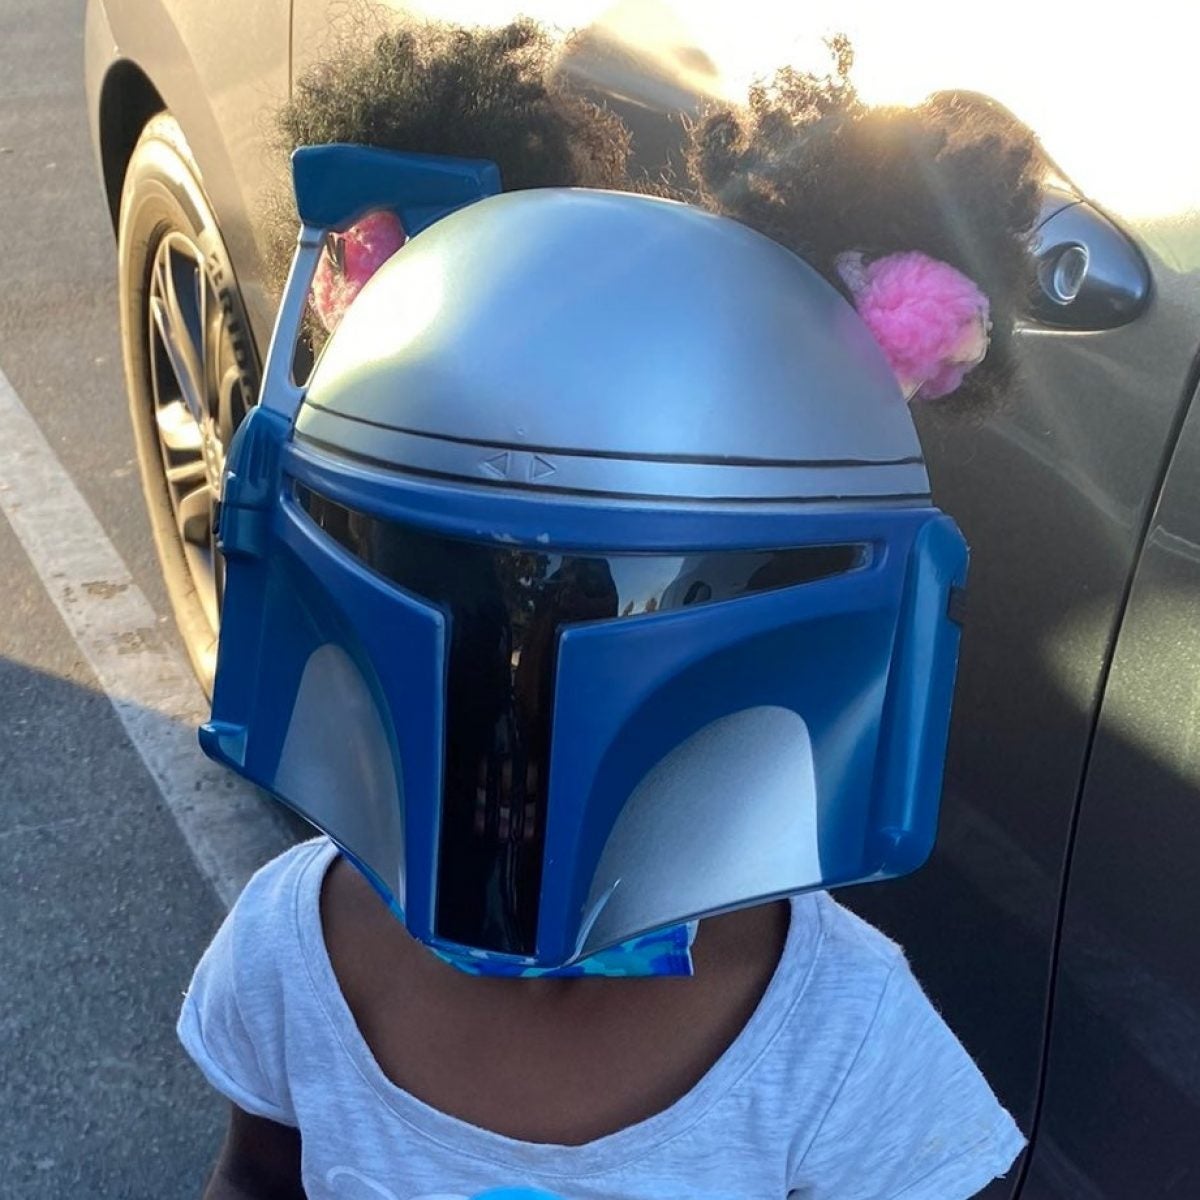 Let The Force Be With Her! Five-Year-Old Stunts In Star Wars Mask On Shopping Trip